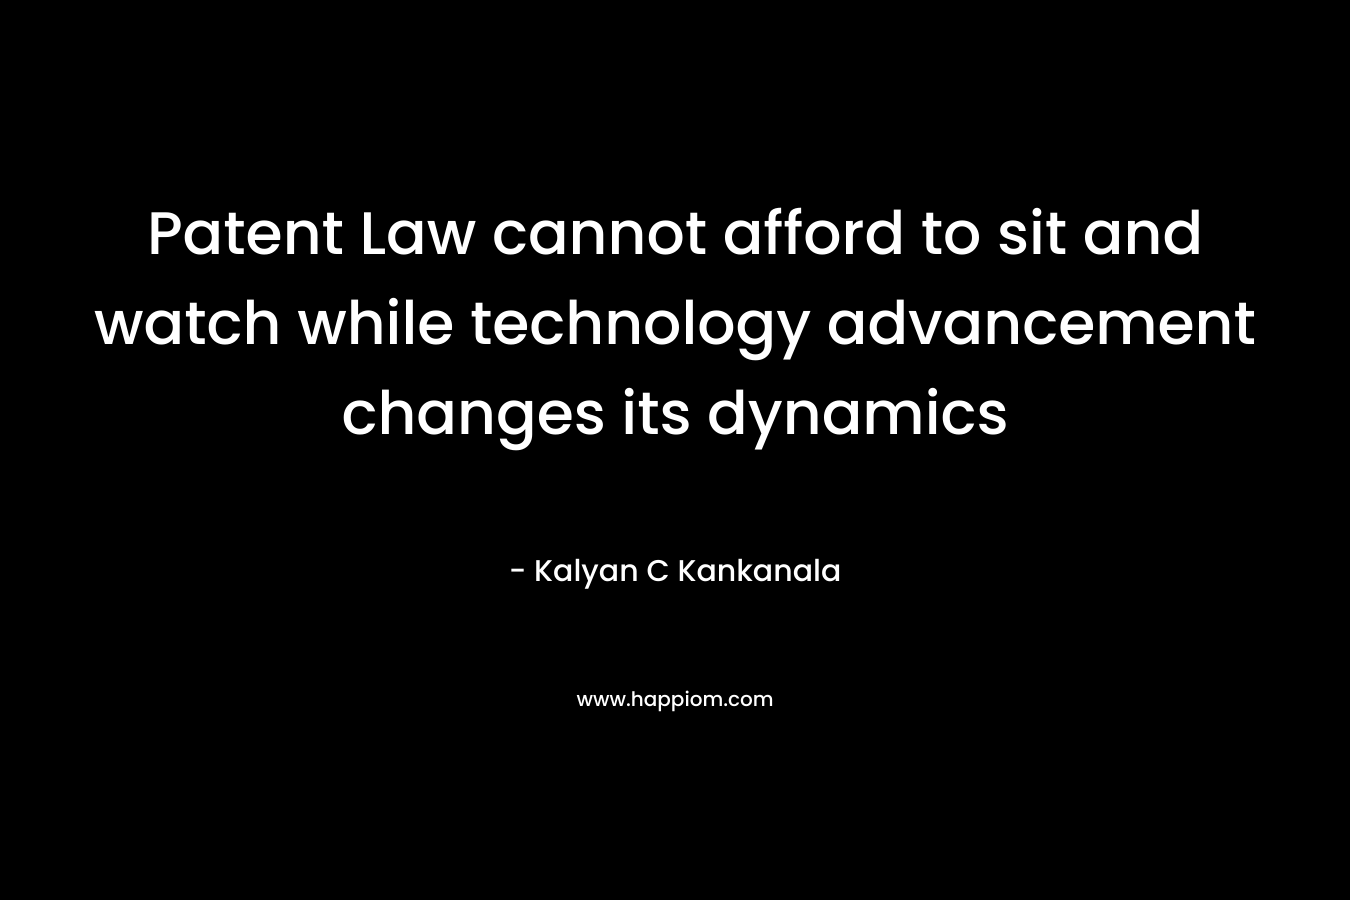 Patent Law cannot afford to sit and watch while technology advancement changes its dynamics – Kalyan C Kankanala